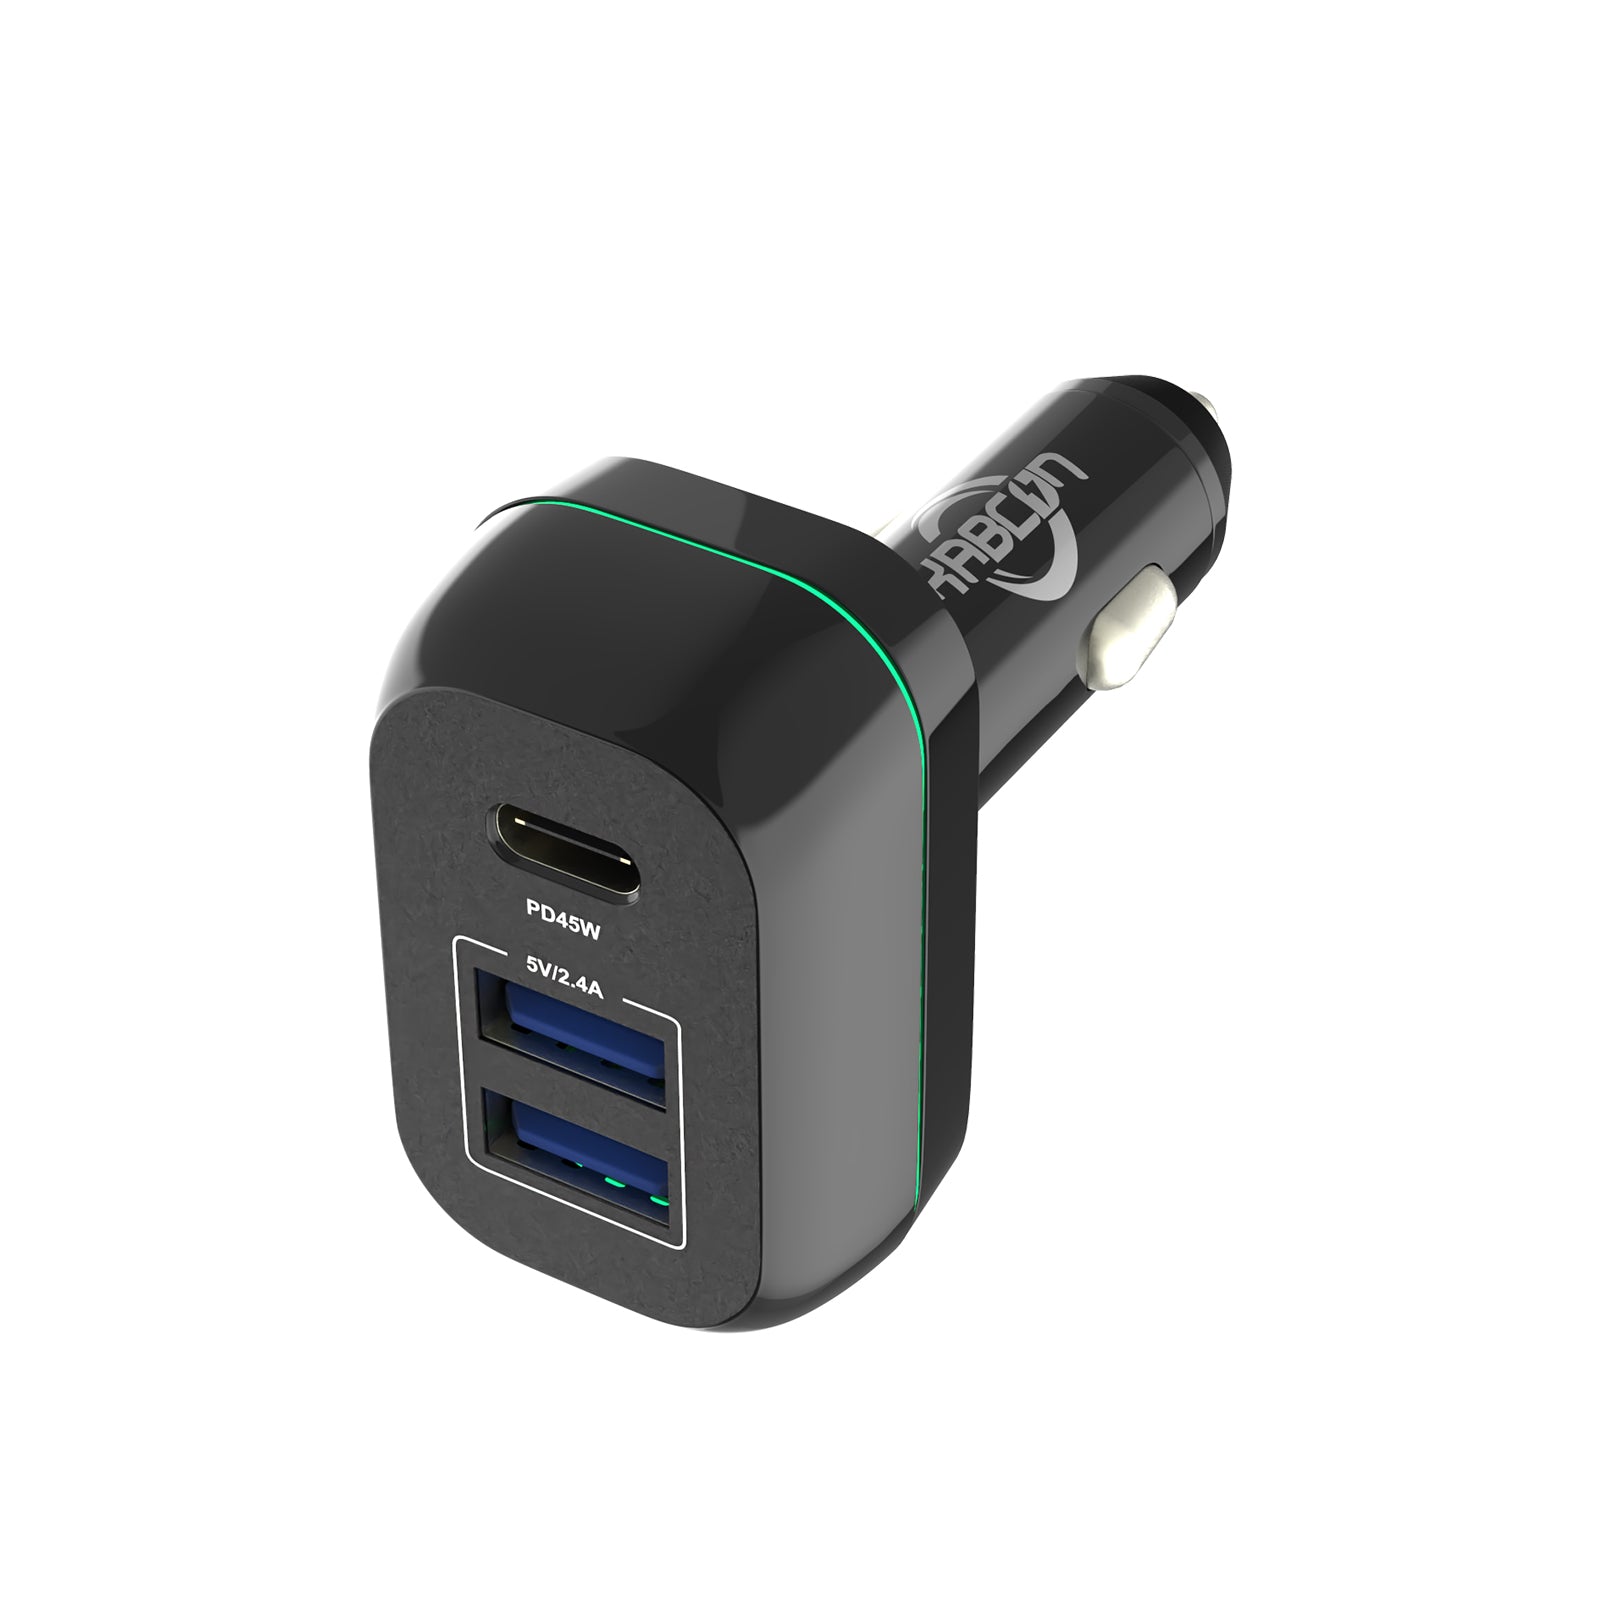 USB-C PD and USB-A QC3.0 Low Profile Car Lighter Adapter